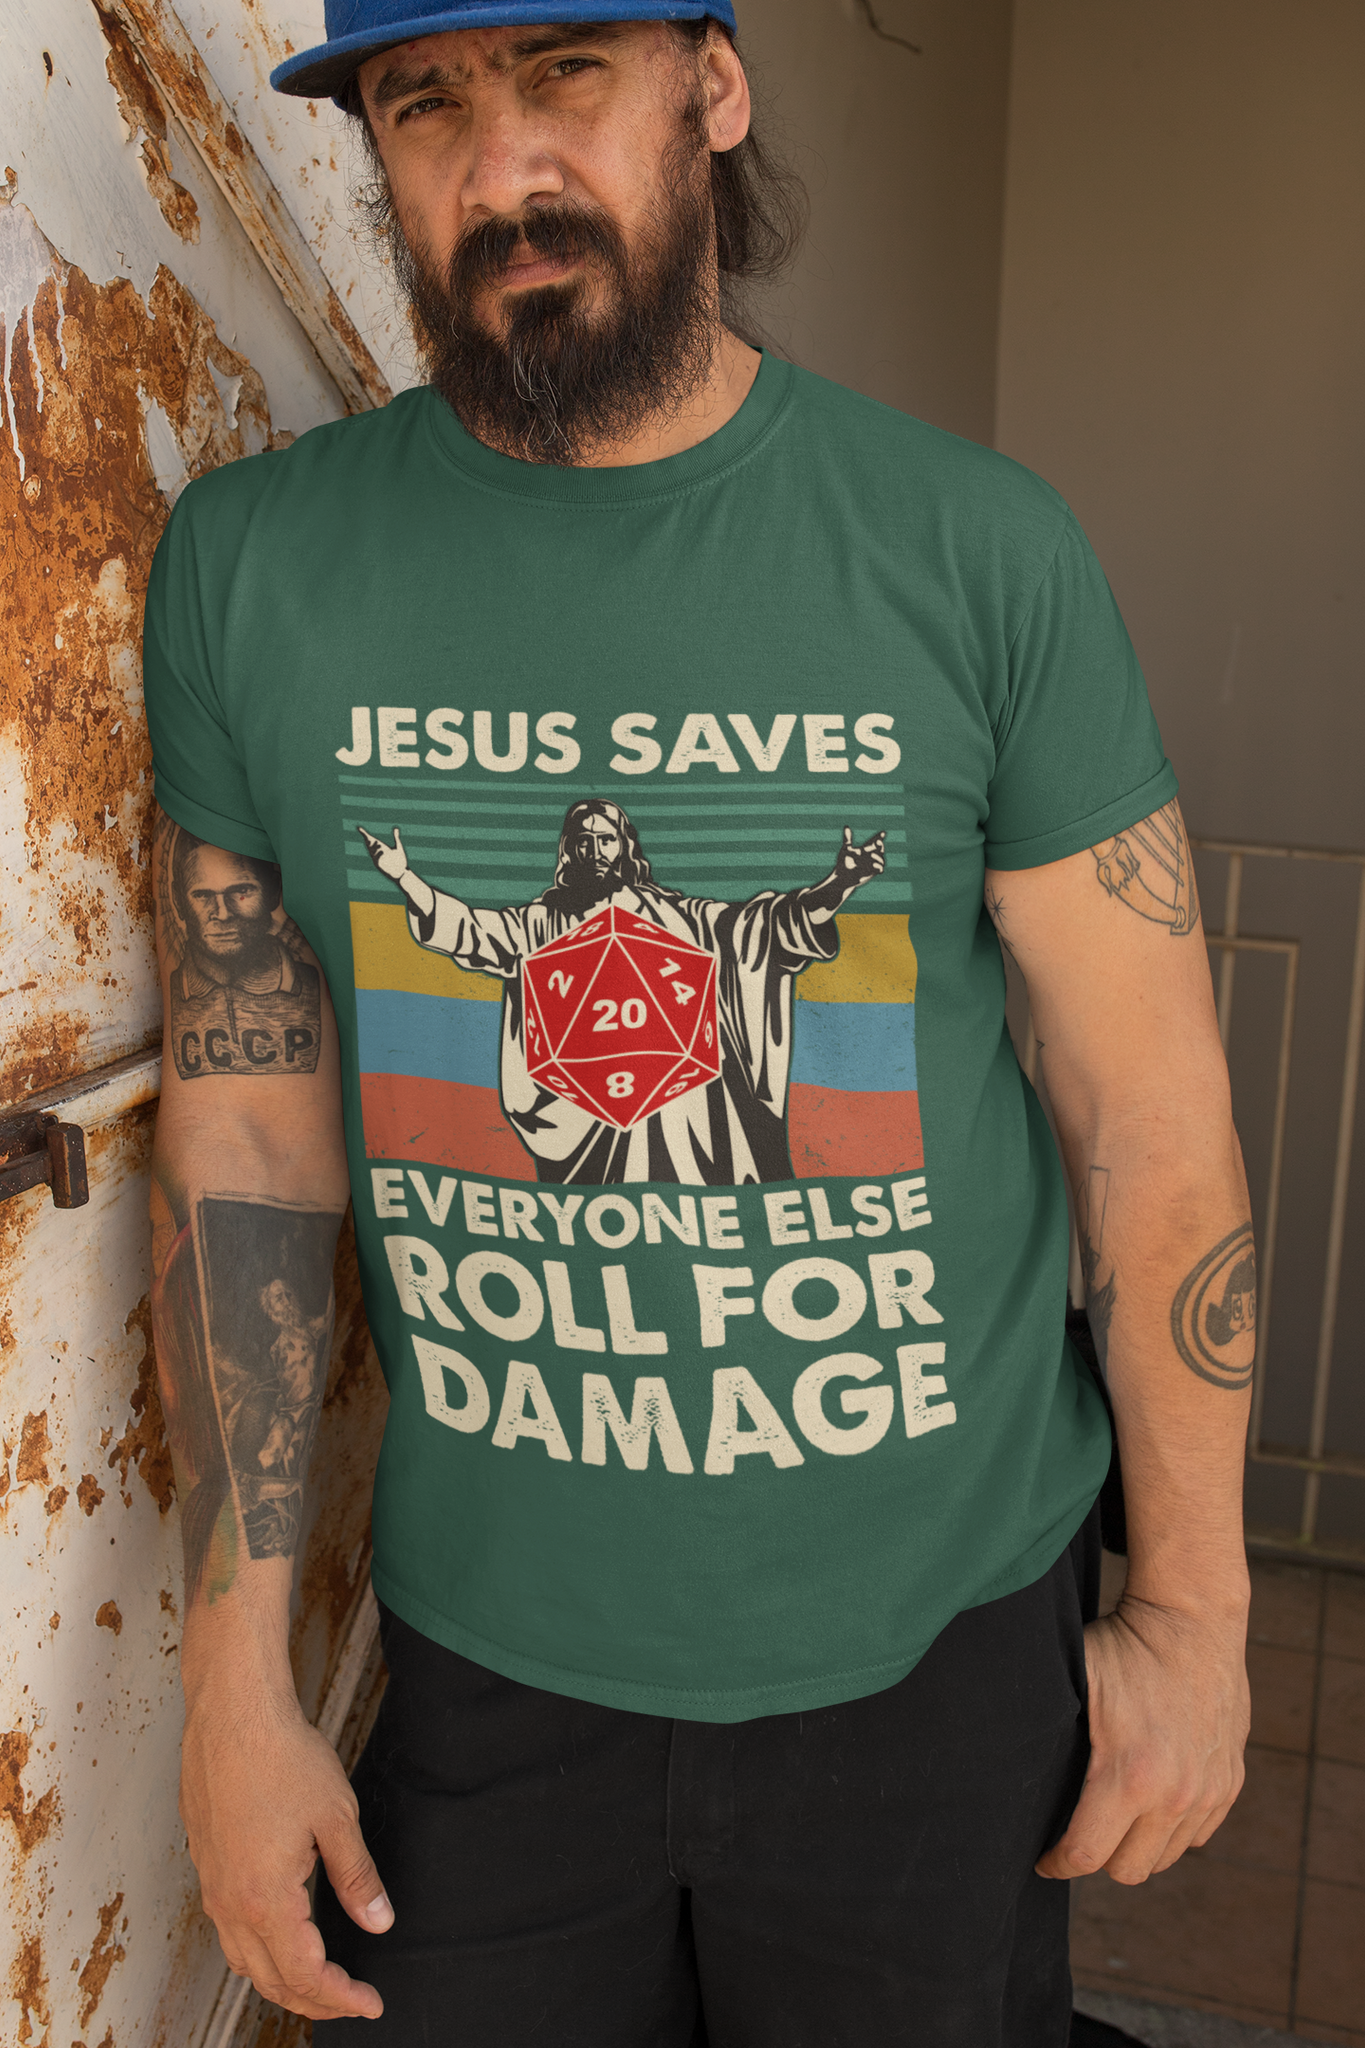 Dungeon And Dragon T Shirt, Jesus Saves Everyone Else Roll For Damage DND T Shirt, RPG Dice Games Tshirt